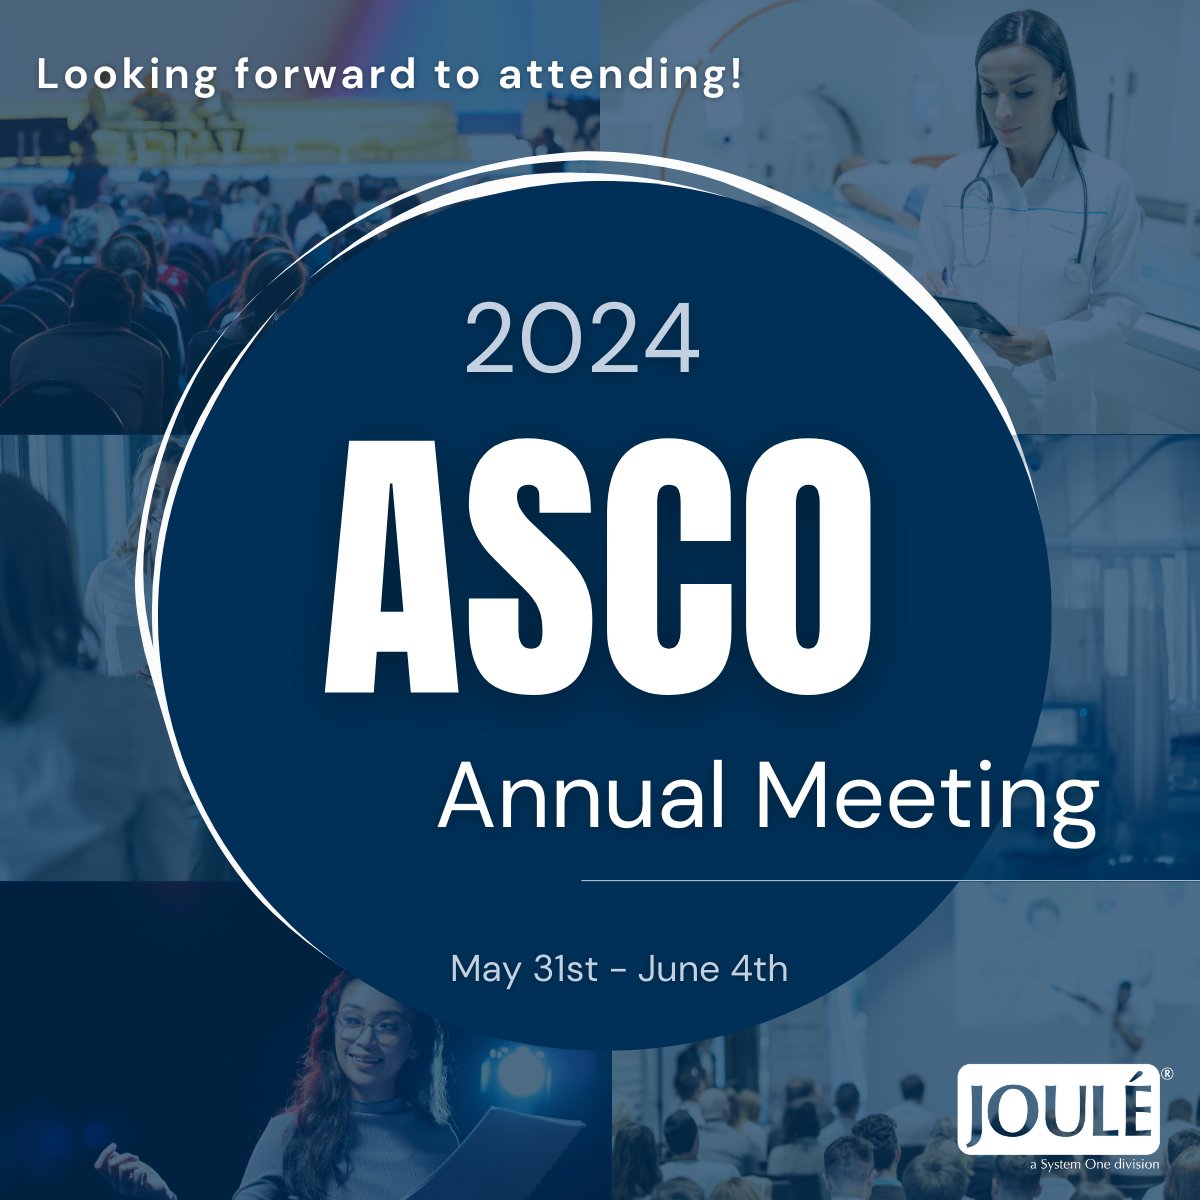 We are gearing up for the 2024 ASCO Annual Meeting in Chicago! It's more than just an event; it's a catalyst for innovation and progress in oncology. We can't wait to dive into discussions, network, and drive change in cancer care. See you there! 👋

#ASCO2024 #JouleAllDay